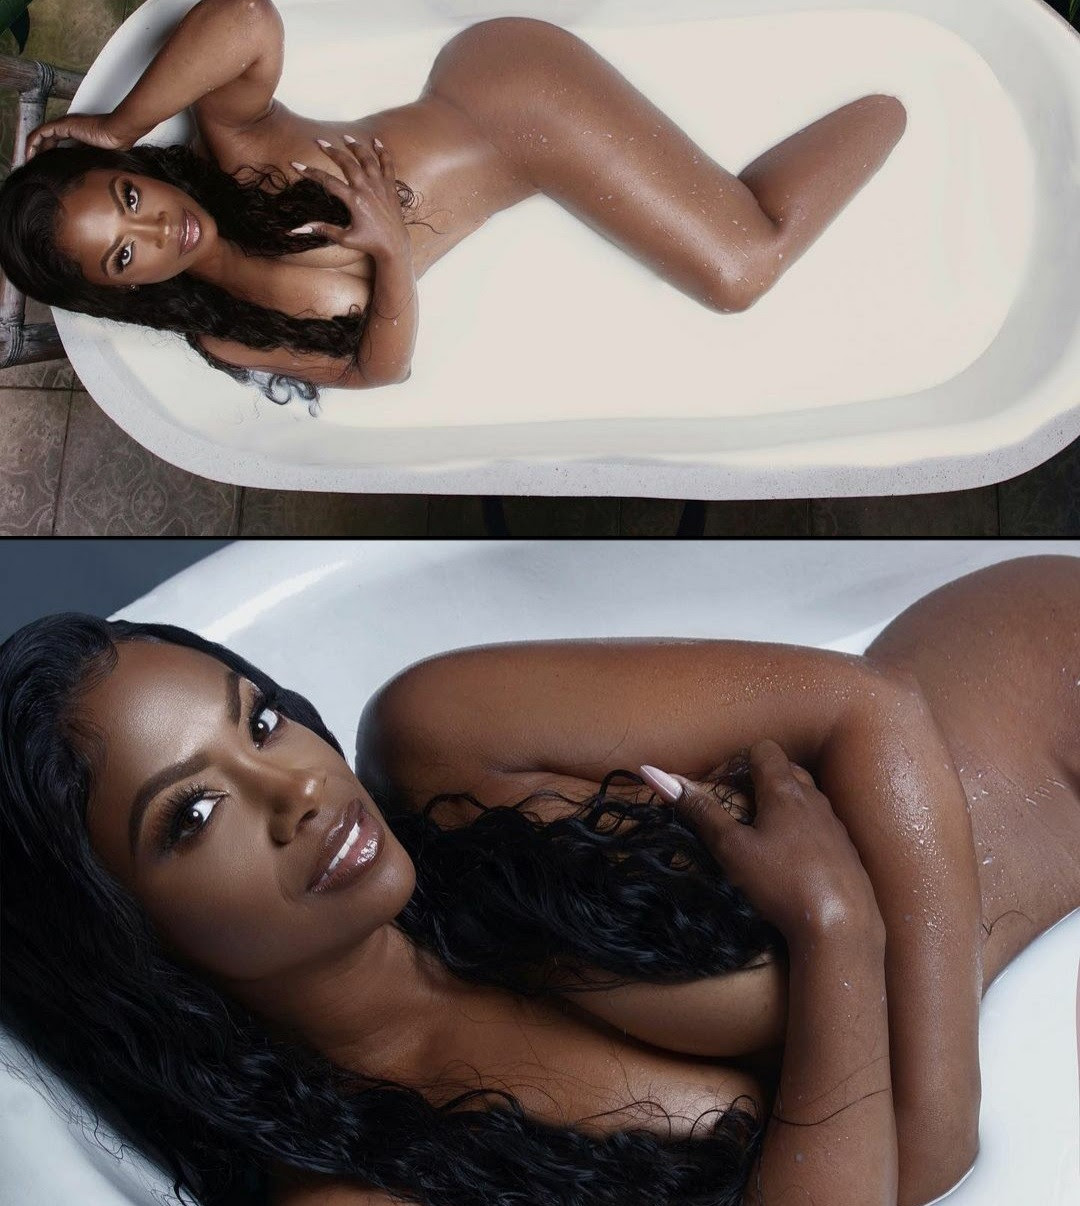 Kandi Burruss strips to her birthday suit as she poses in tub